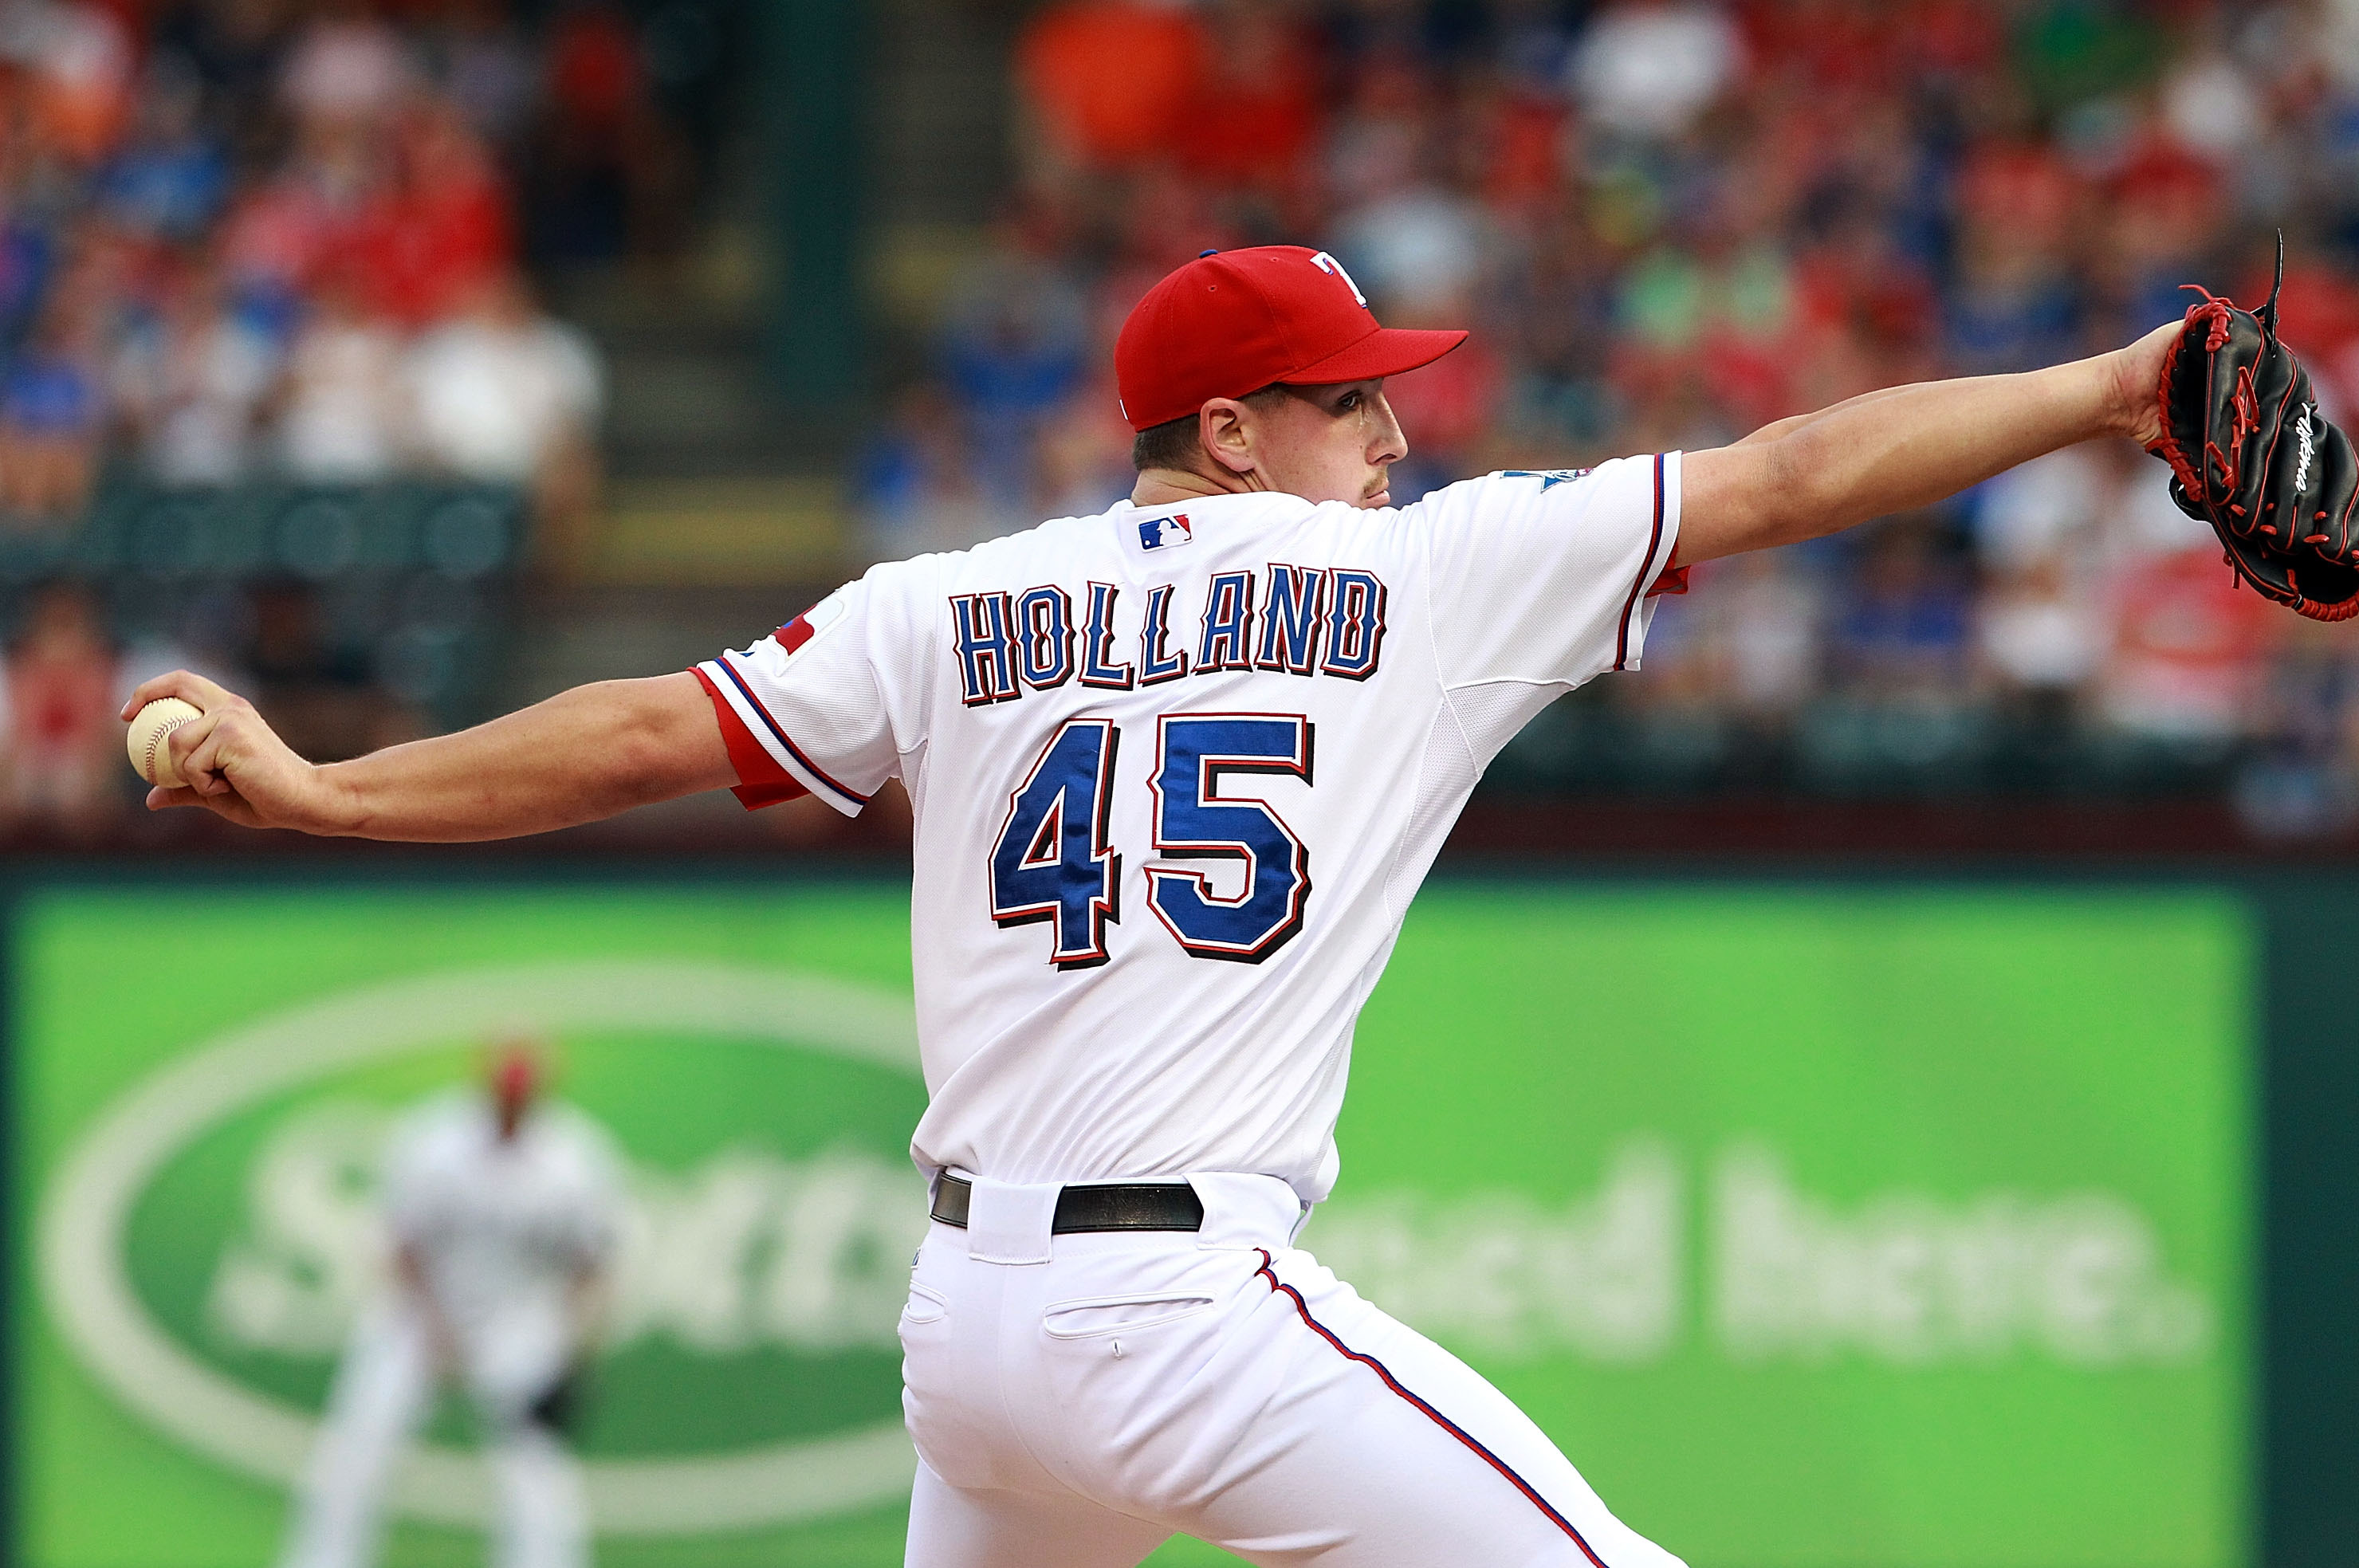 Derek Holland will start again for Rangers but date is up in air